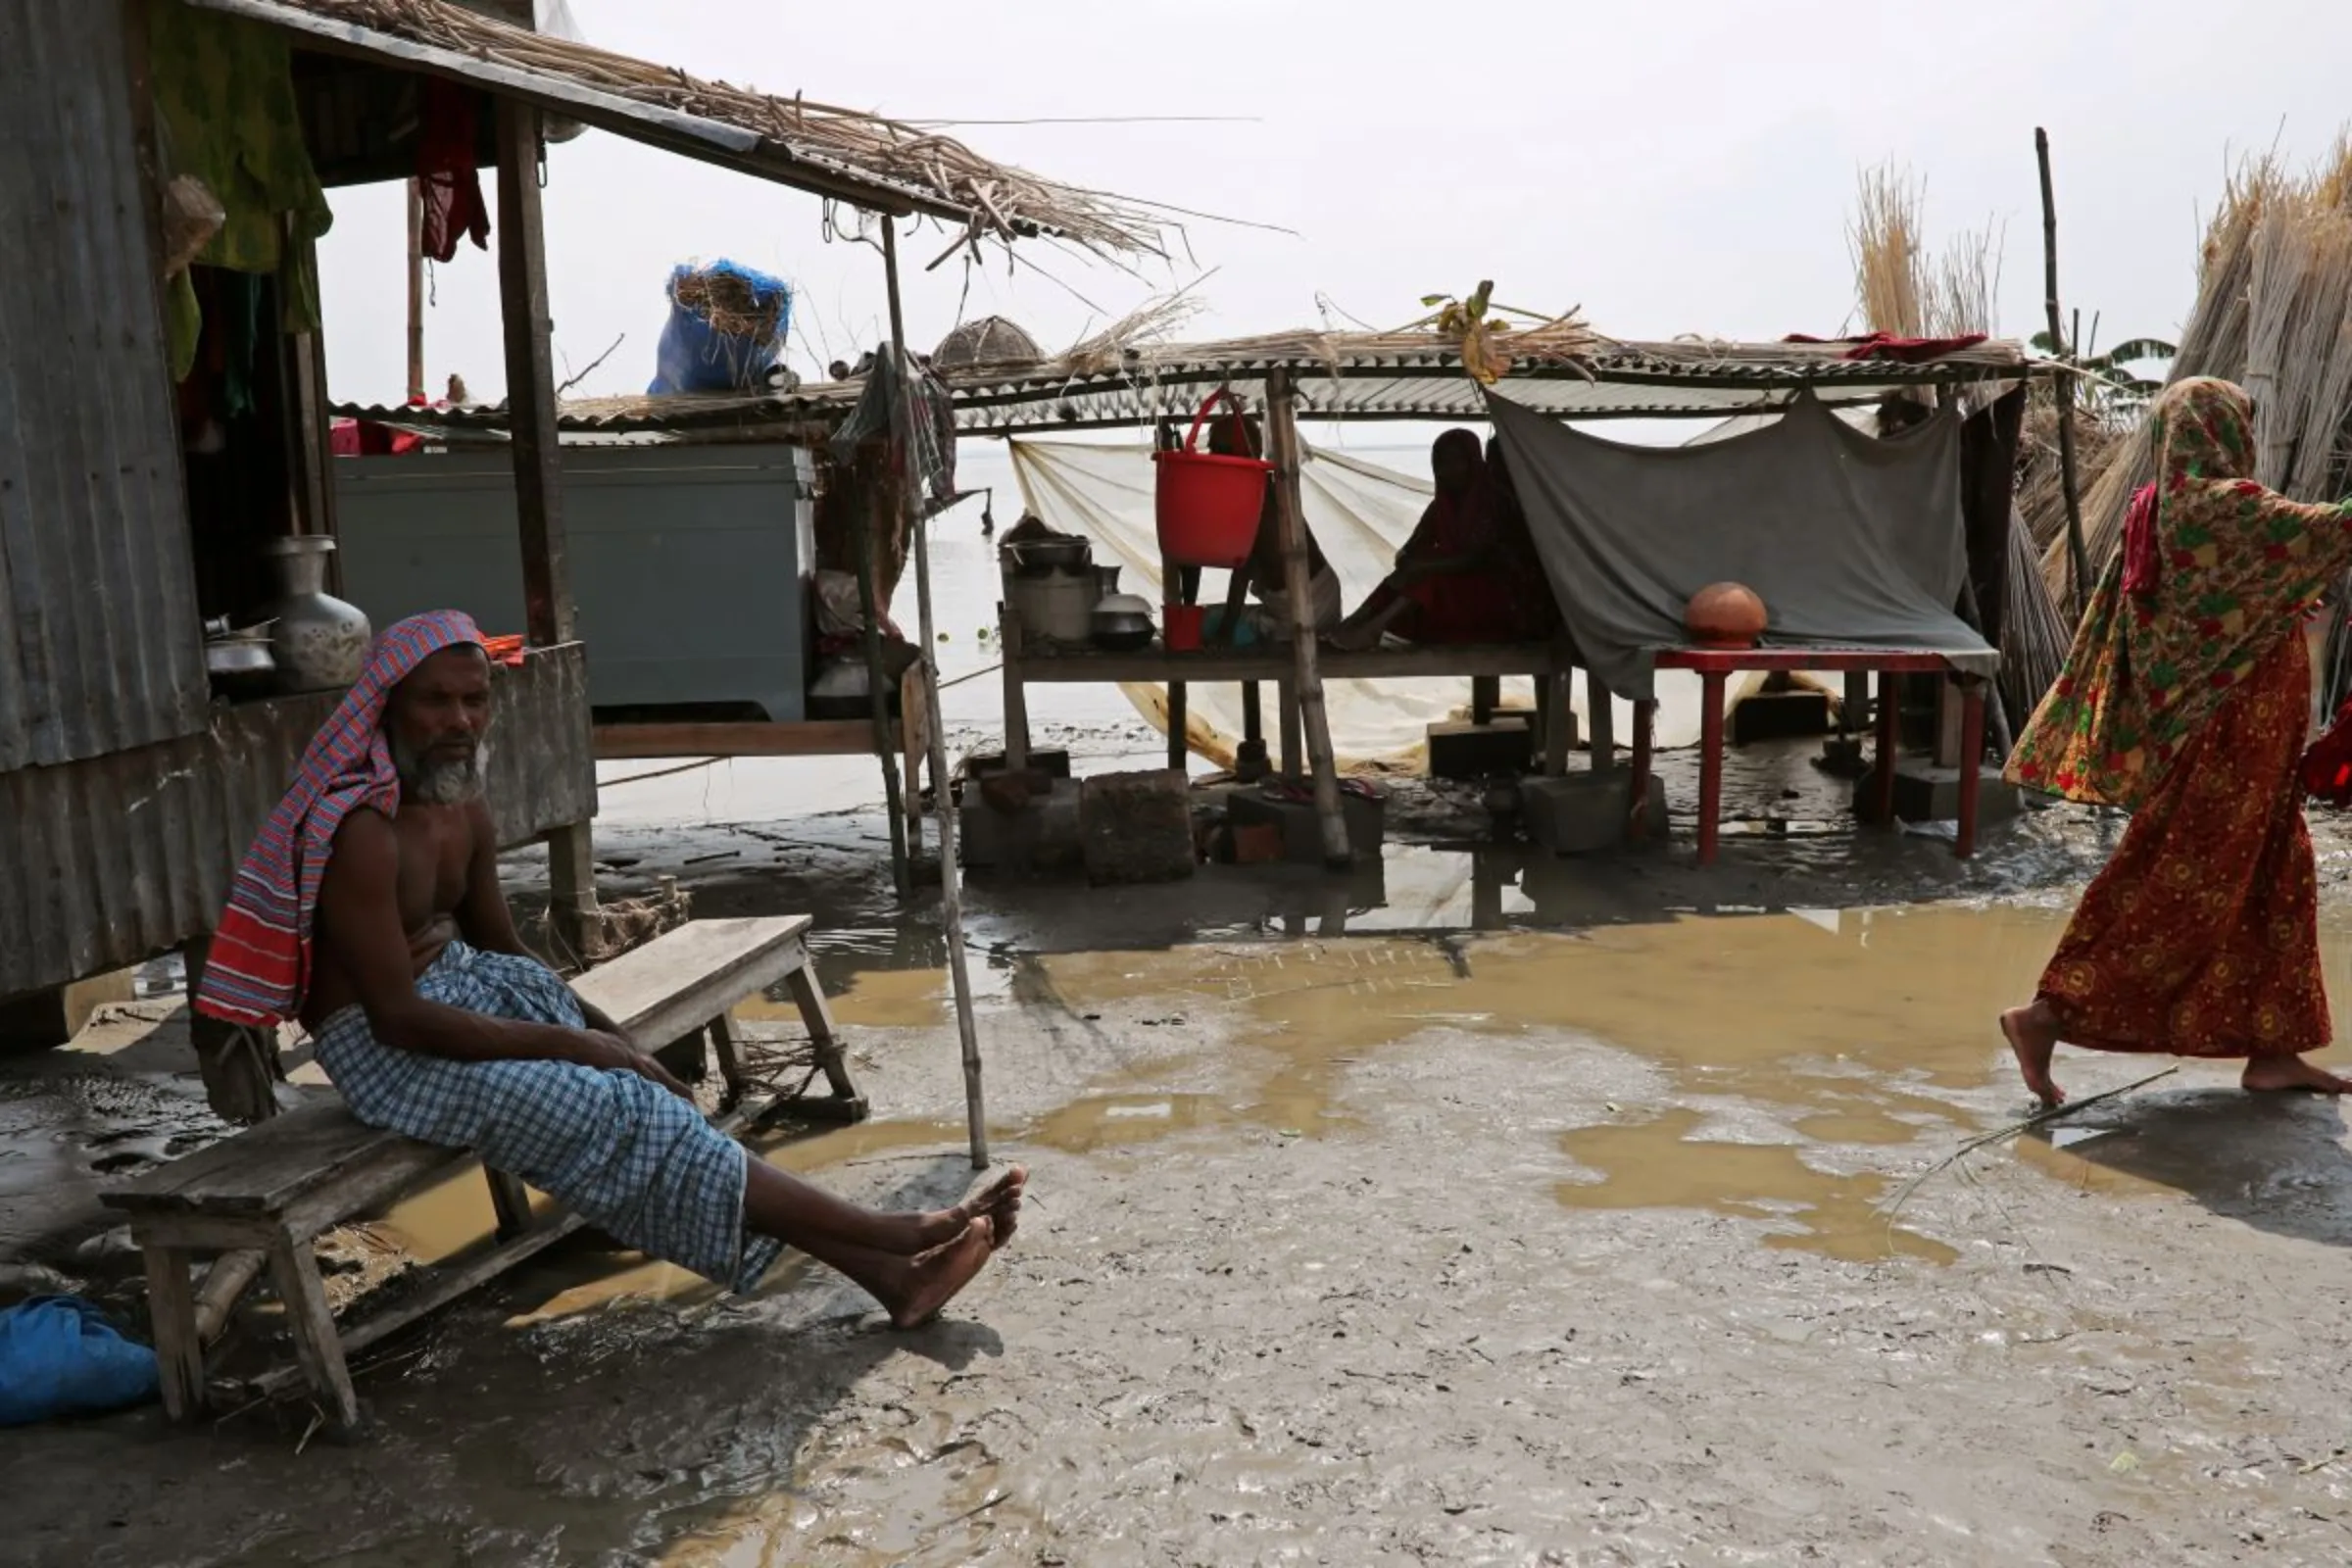 Flood-affected people are seen in a temporary shelter on a nearby dry land in Jamalpur, Bangladesh, July 21, 2019